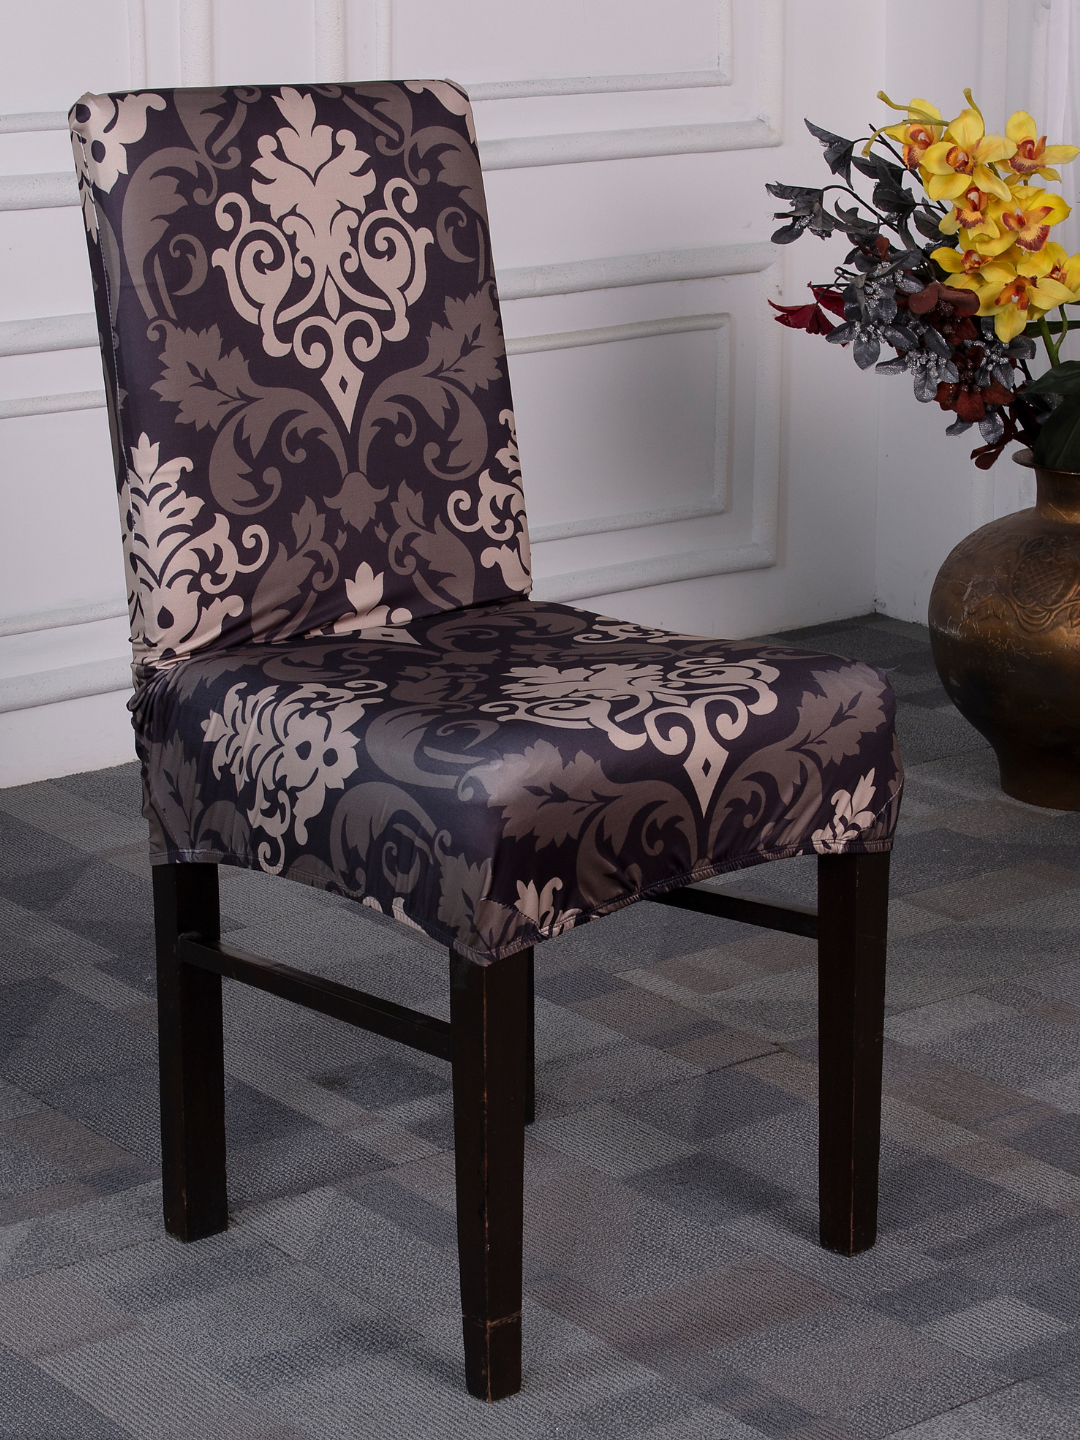 chair cover dining set , dining table chair covers, chair covers slilcovers. ,chair covers set,chair cover set of 6, magic universal chiar cover.brown print, Beautiful chair slip covers will add a classy look to your furniture and protect your chairs